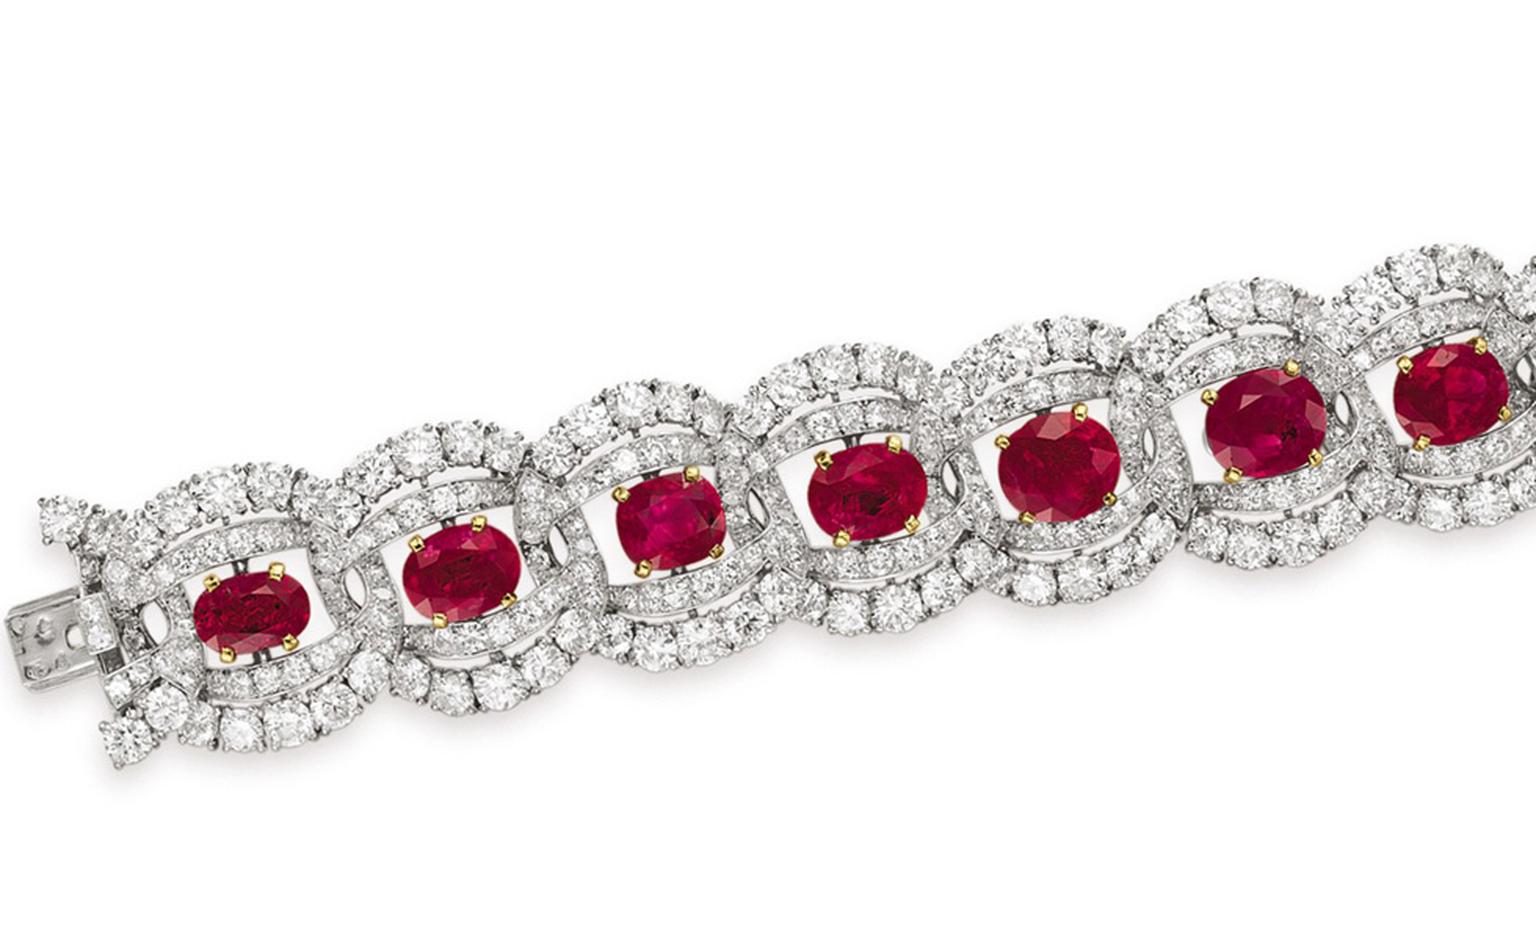 The Cartier Ruby Suite Bracelet Estimate: $150,000 – 200,000. Without a mirror at hand to see how her new jewels looked, she studied her reflection in the pool instead.